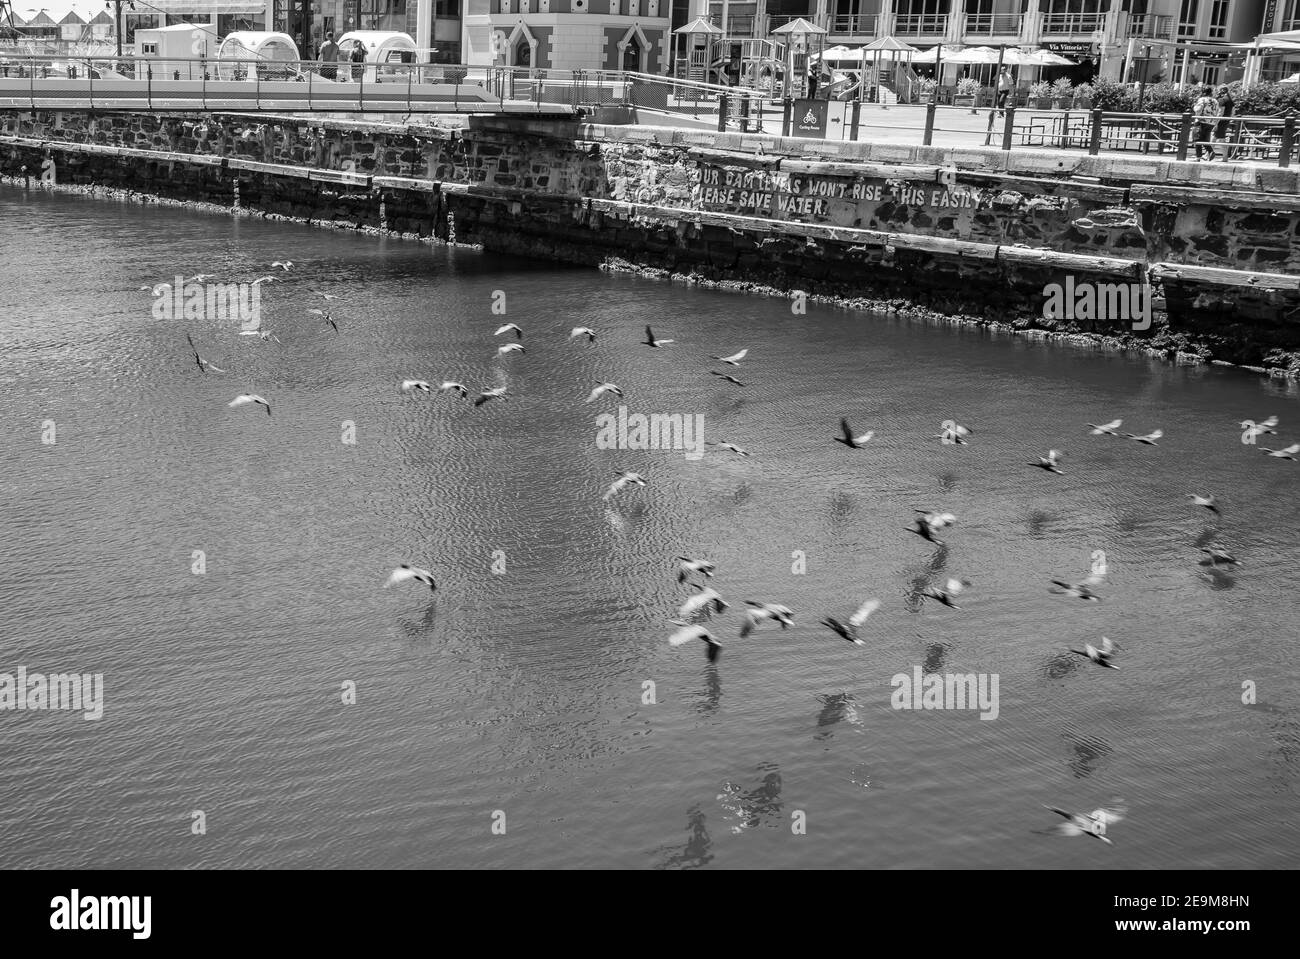 Waterfront- Cape Town, South Africa - 03-02-2021 Black and white shot of flock of birds majestically soaring under a bridge crossing. Stock Photo